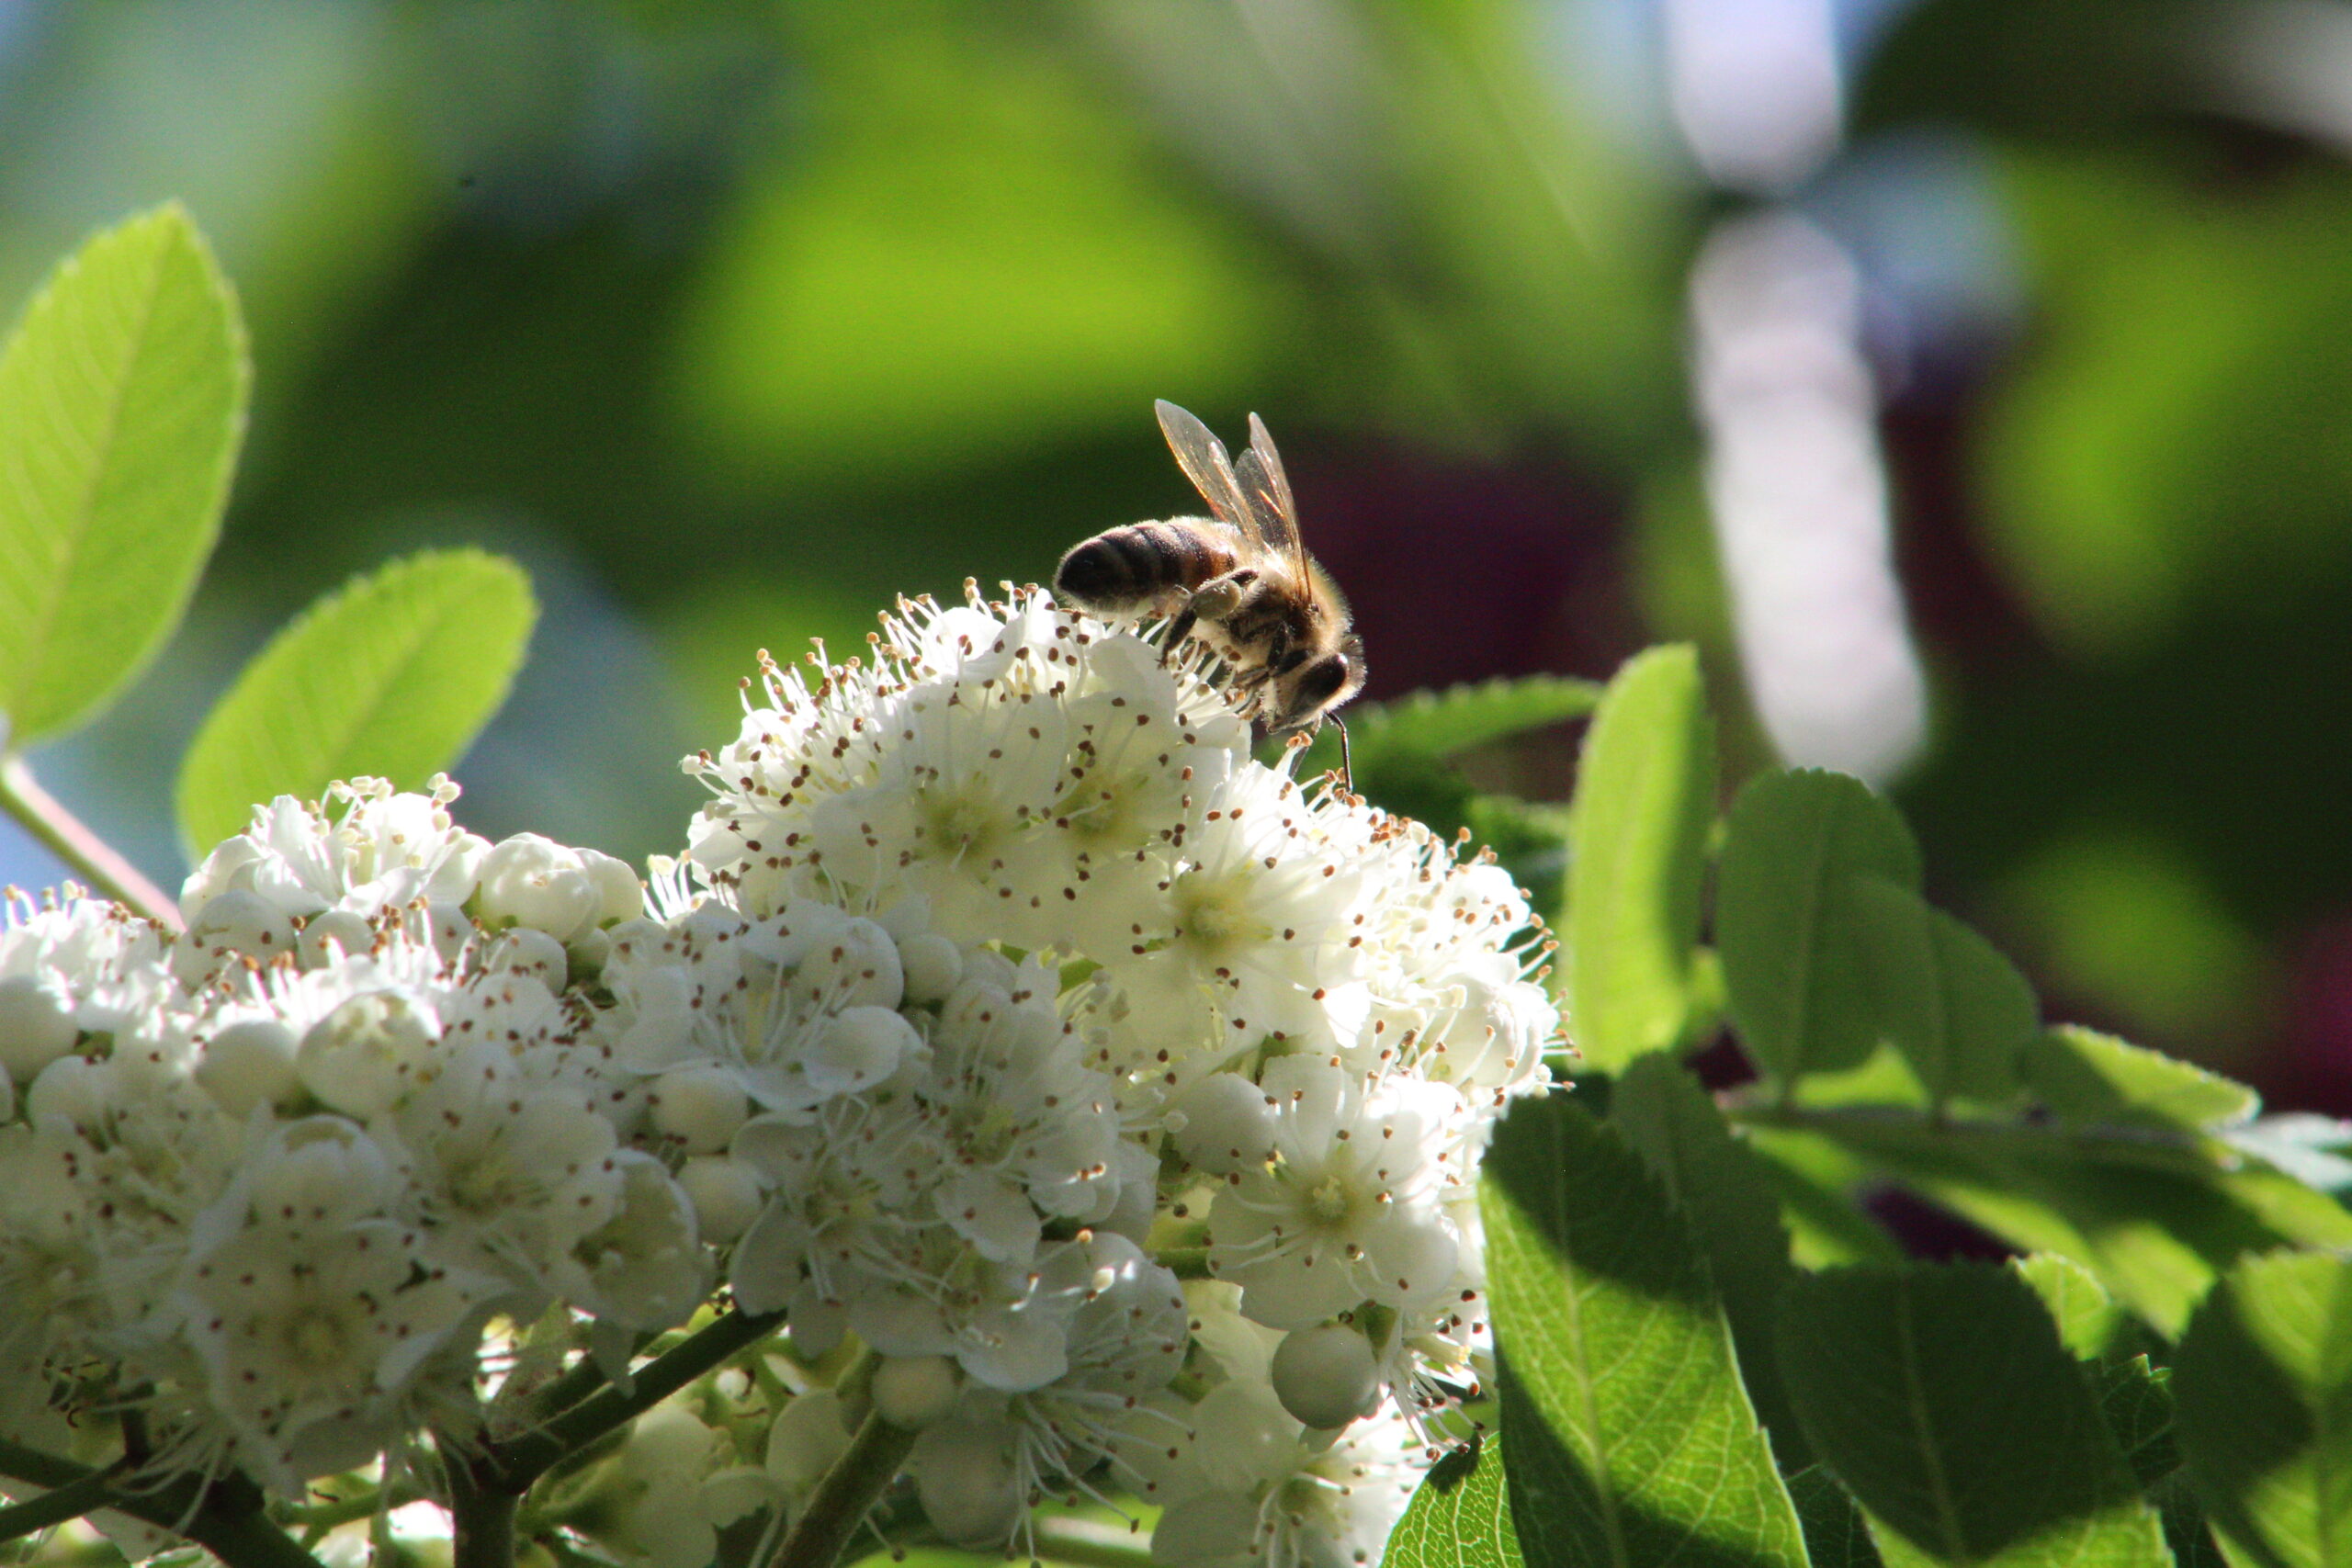 A honeybee visits the flowers on a flowering tree in Mansions Park in Manitou Springs.